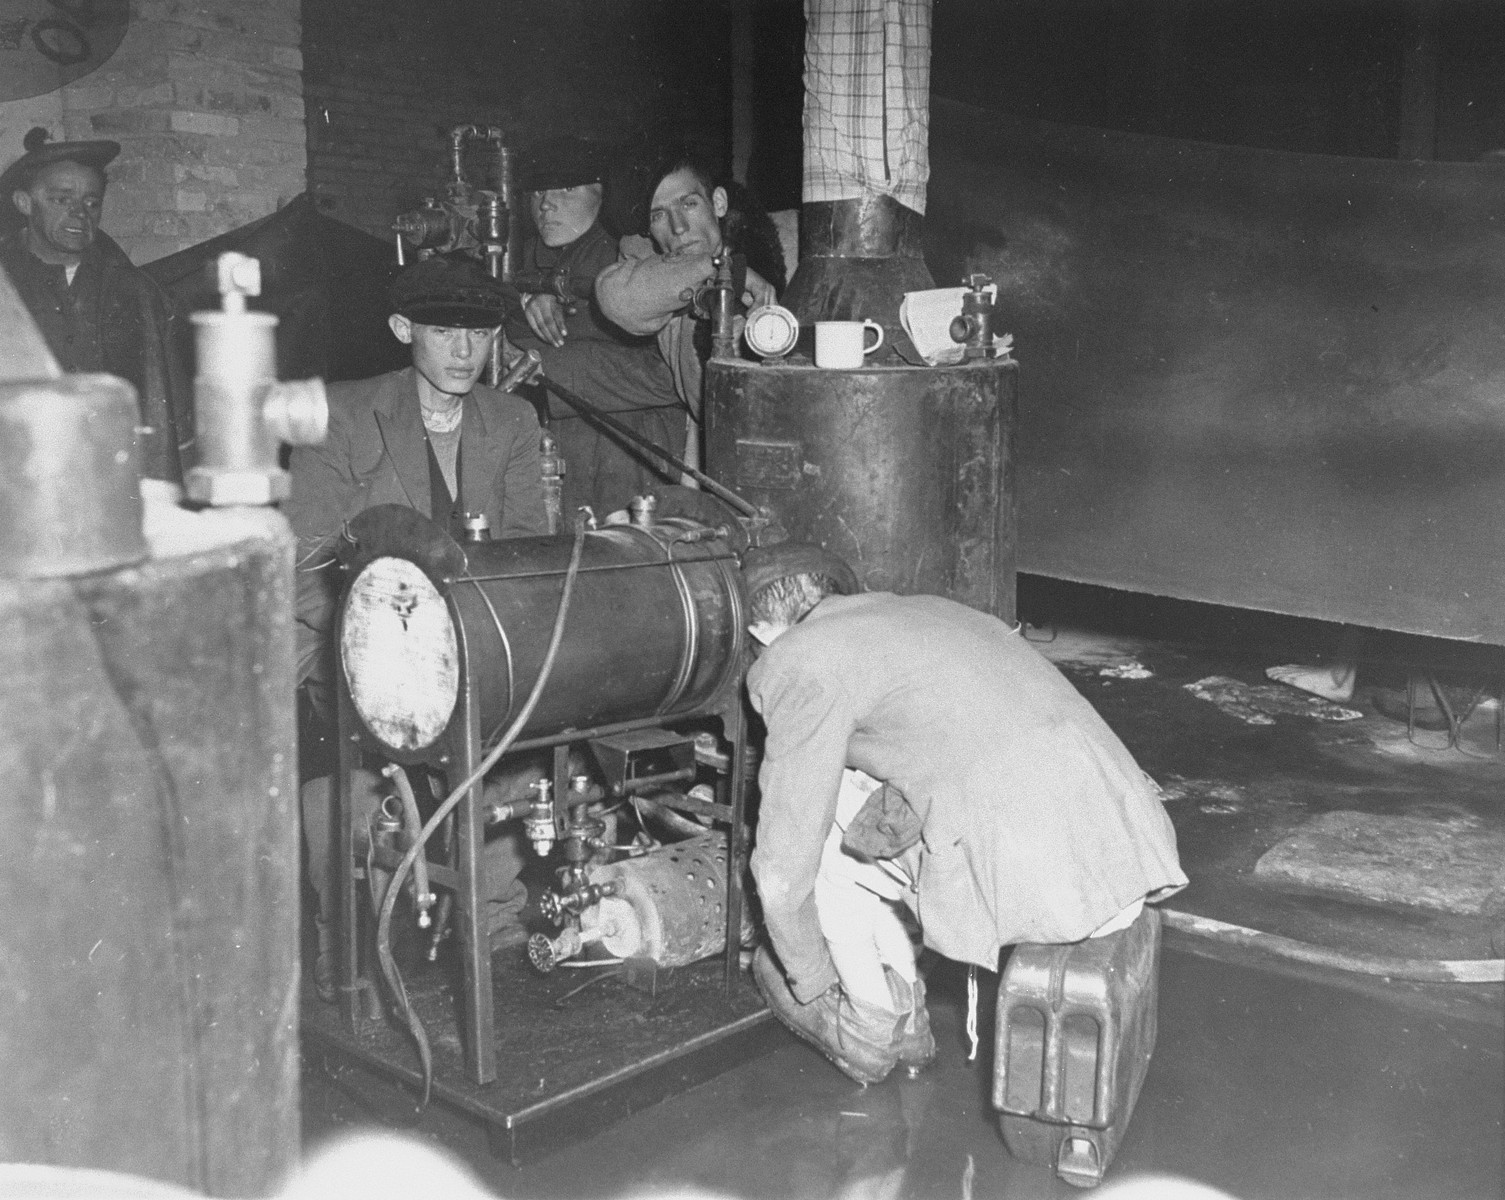 Survivors in Bergen-Belsen warming themselves next to a water heater.

Original caption reads: " In former German prison camp at Belsen, Germany, foreign workers attempt to warm their skeleton like bodies by a water heater.  The camp has no means of heating at all."